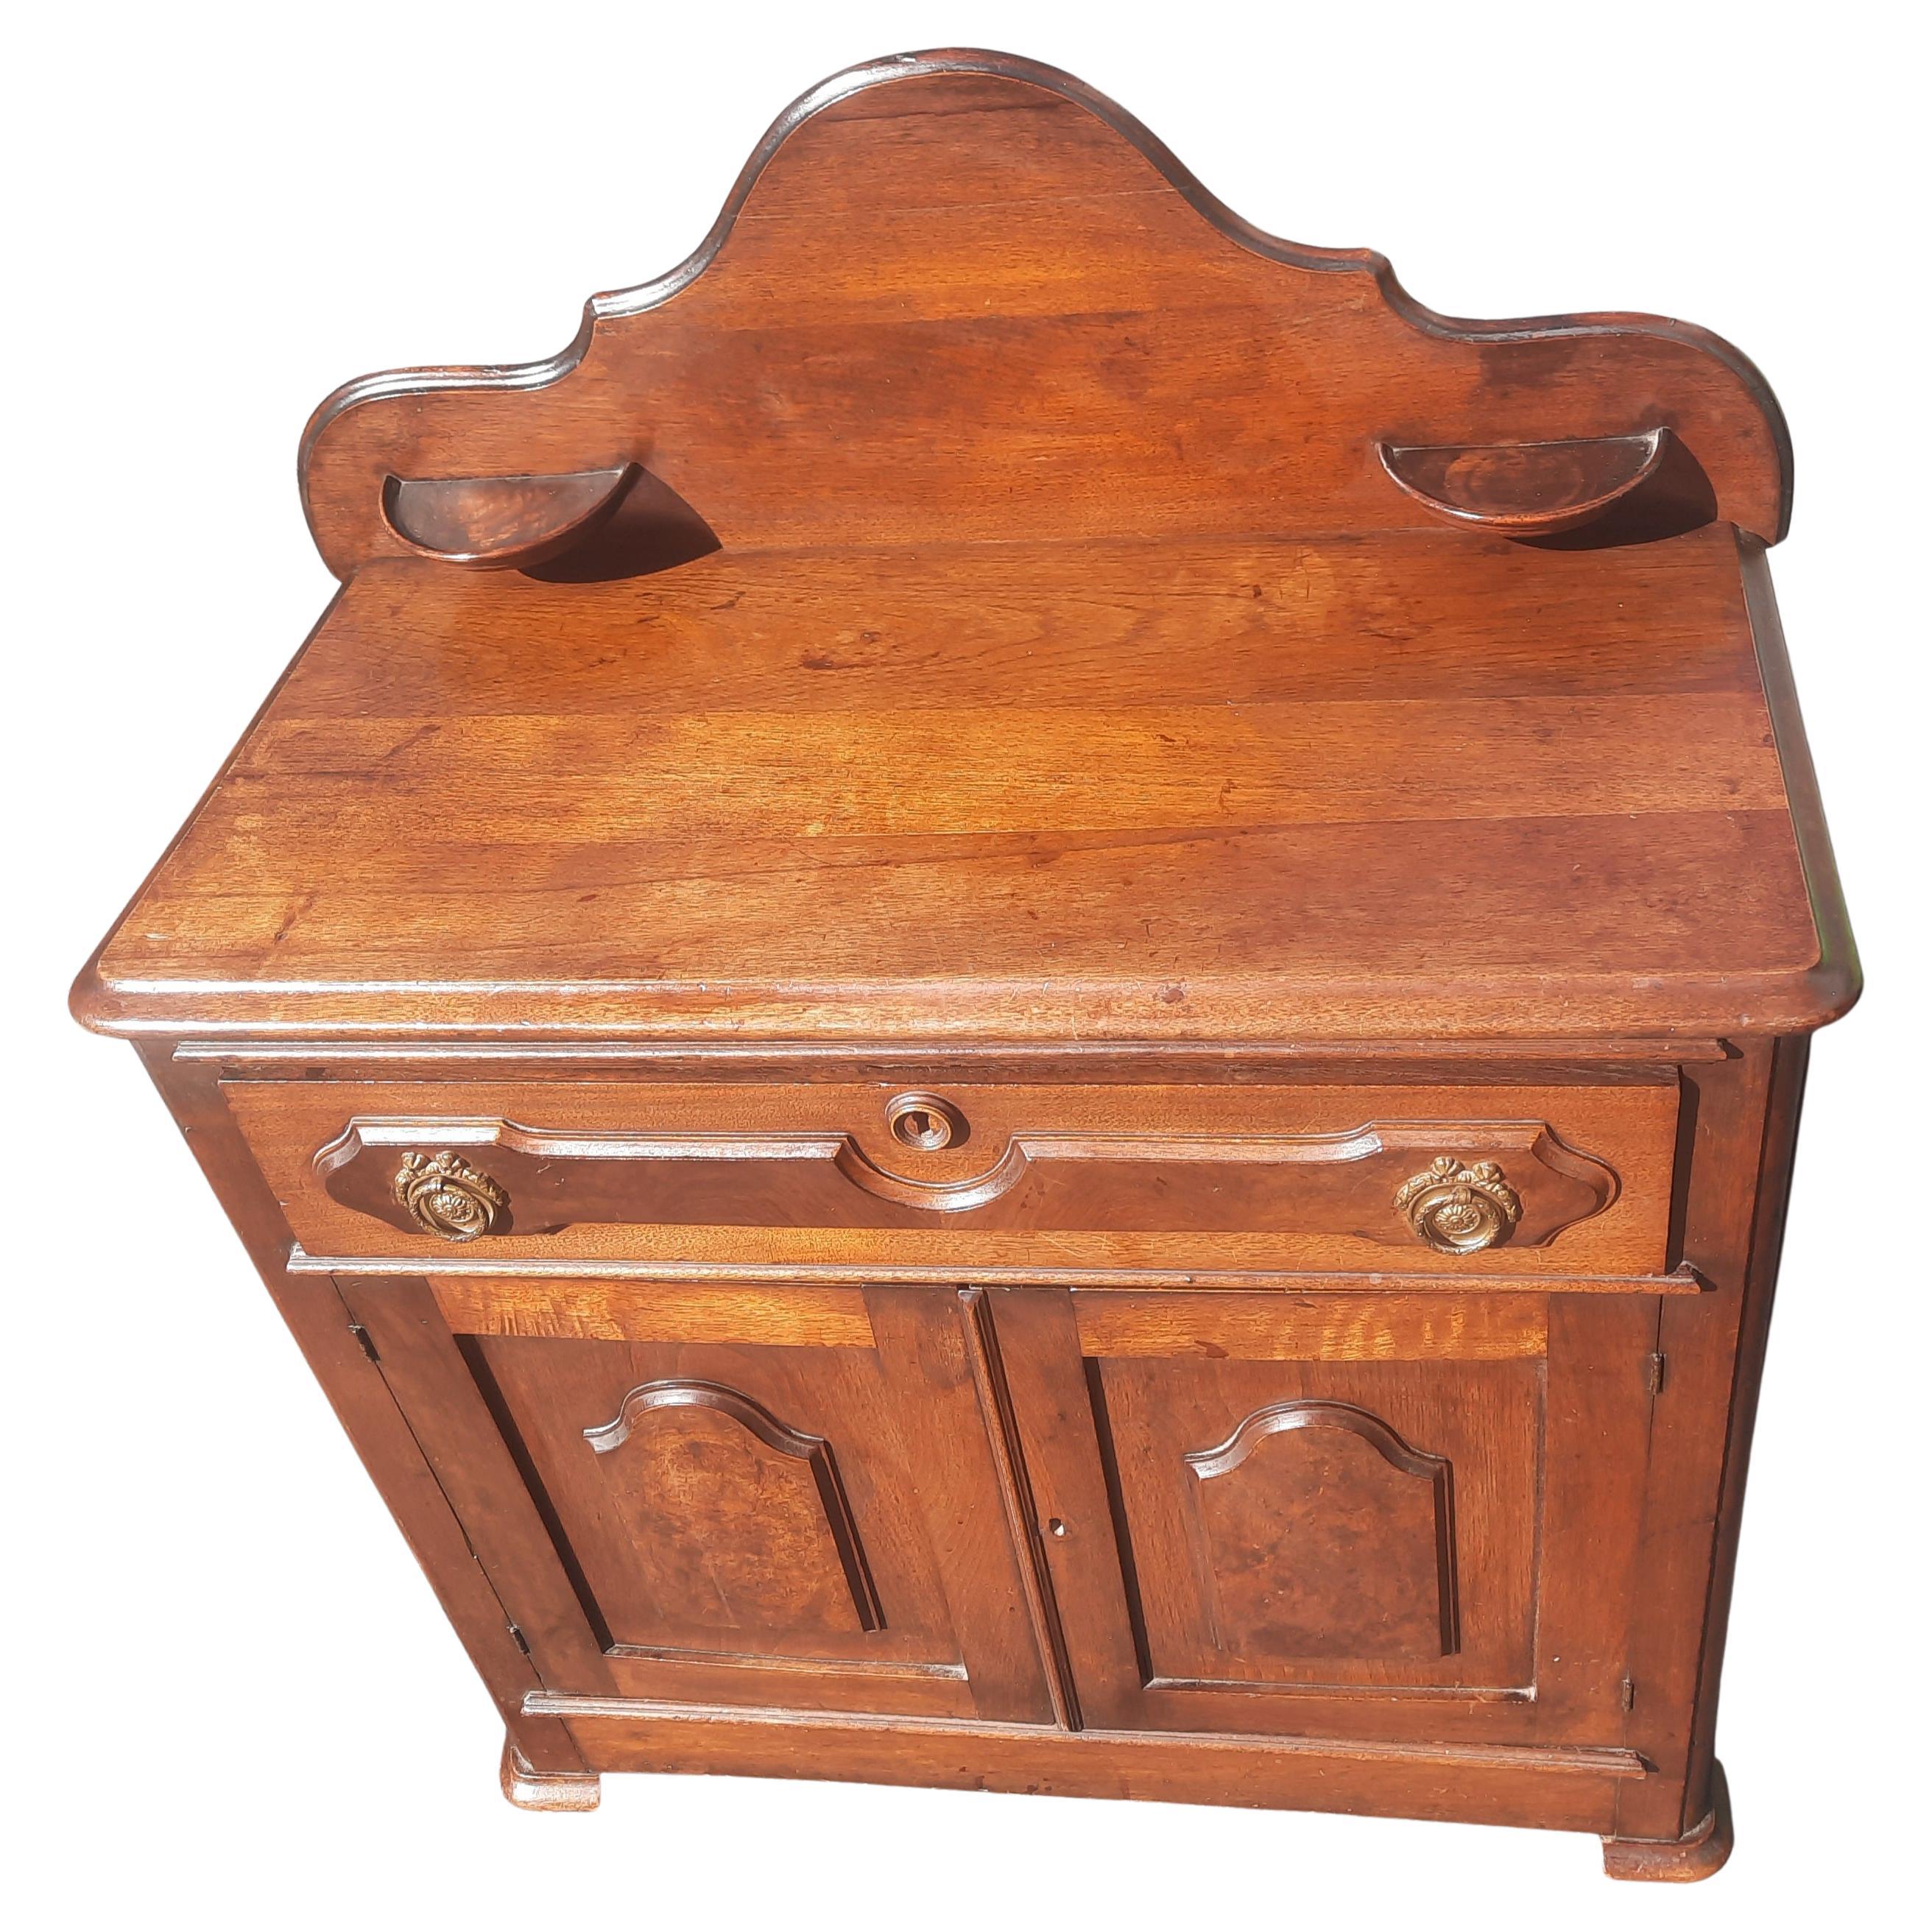 Antique walnut washstand with candle holder, soap holder and back splash 1 trimmed knapp joint drawer, 
 paneled doors. Circa 1870-90 without. Good condition. On wheels.
Wear appropriate with age and use, overall in good vintage